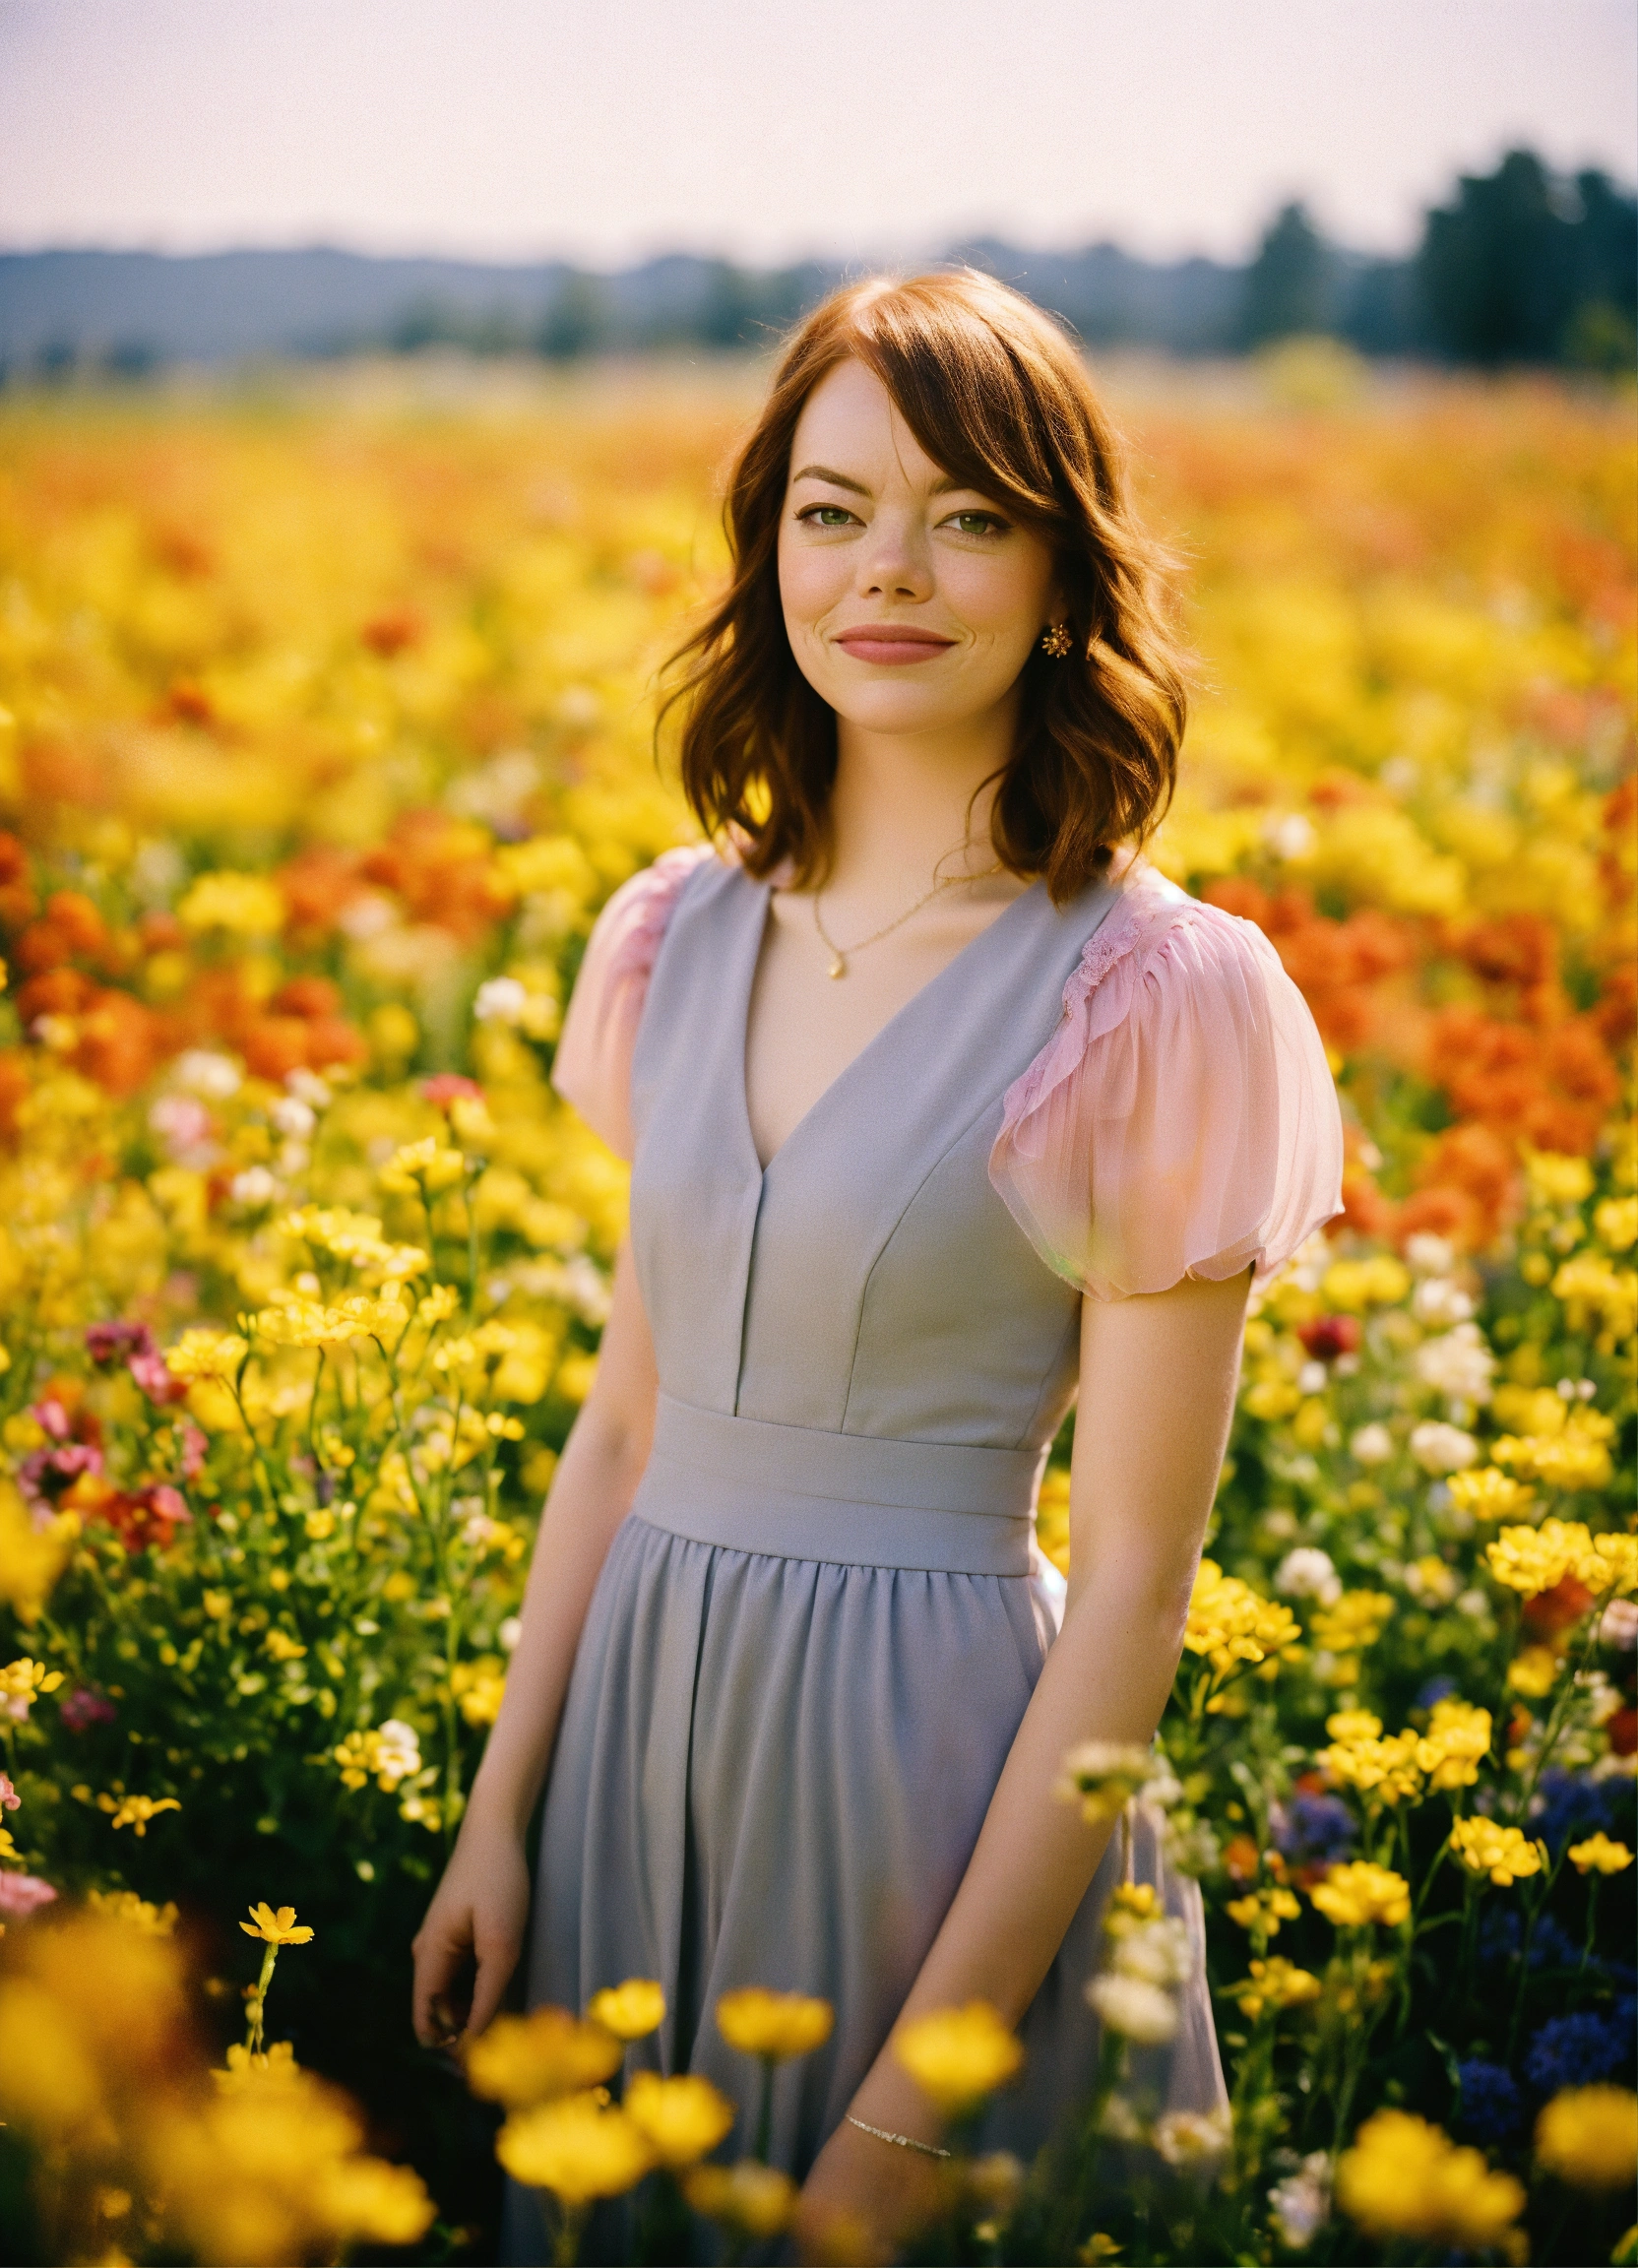 Lexica - Happy Emma Stone standing in a beautiful field of flowers